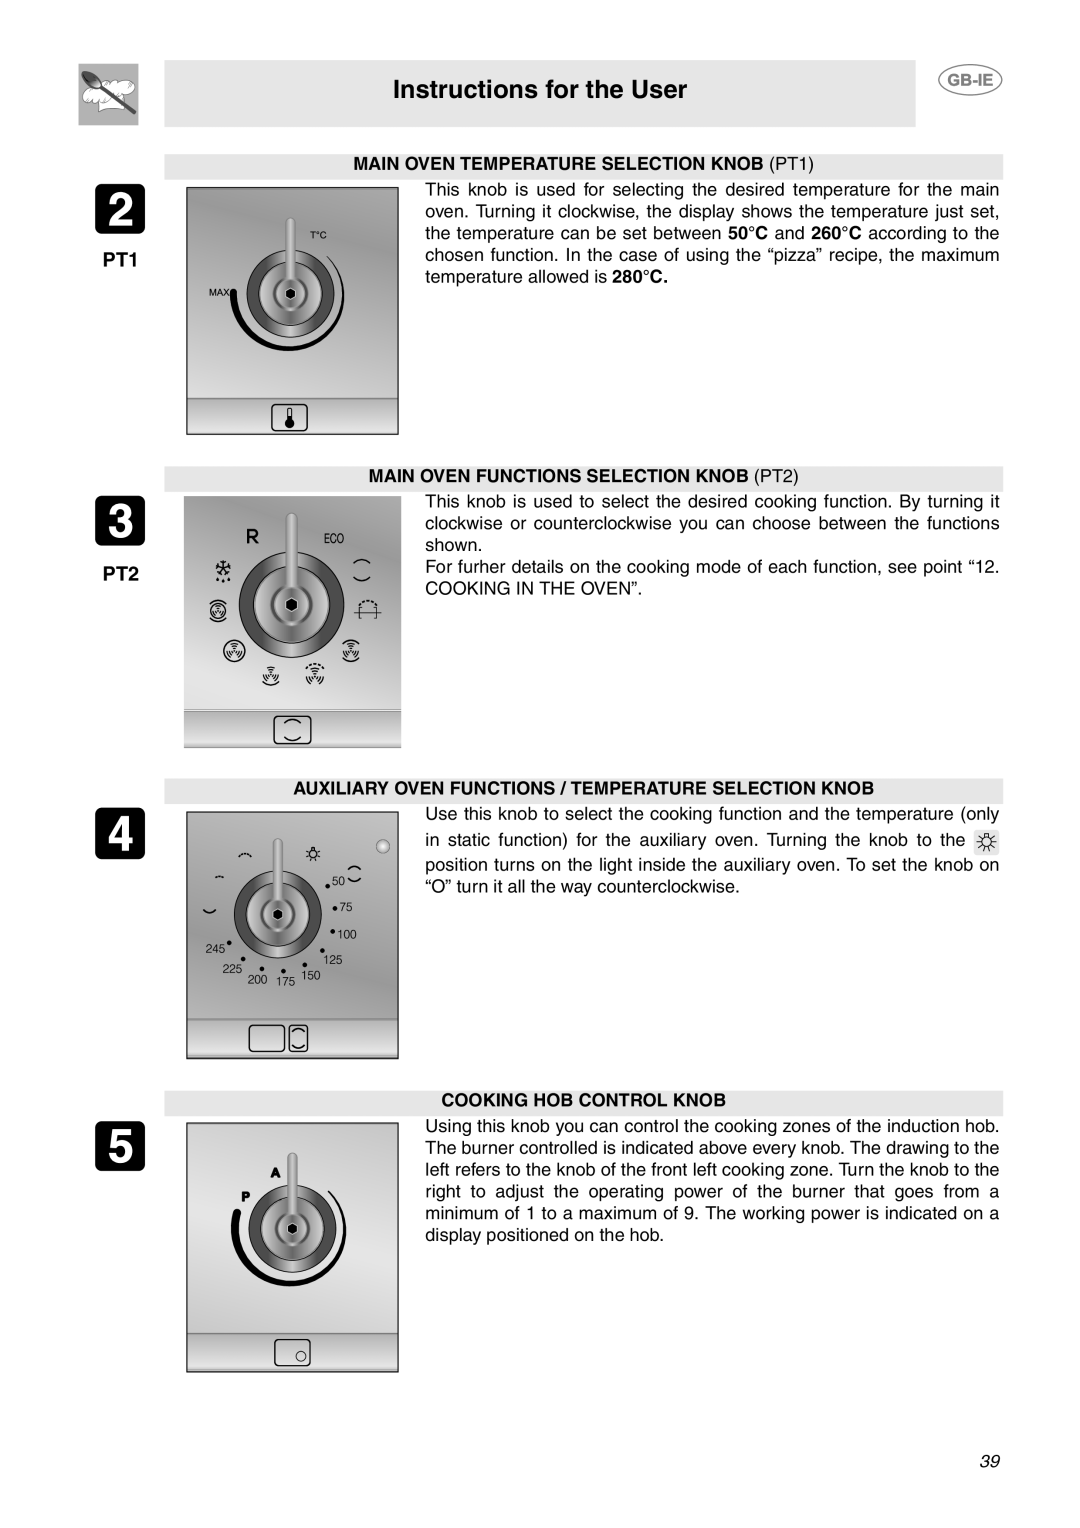 Smeg CE92IMX manual Instructions for the User, PT1 PT2, MAIN OVEN TEMPERATURE SELECTION KNOB PT1, Cooking Hob Control Knob 